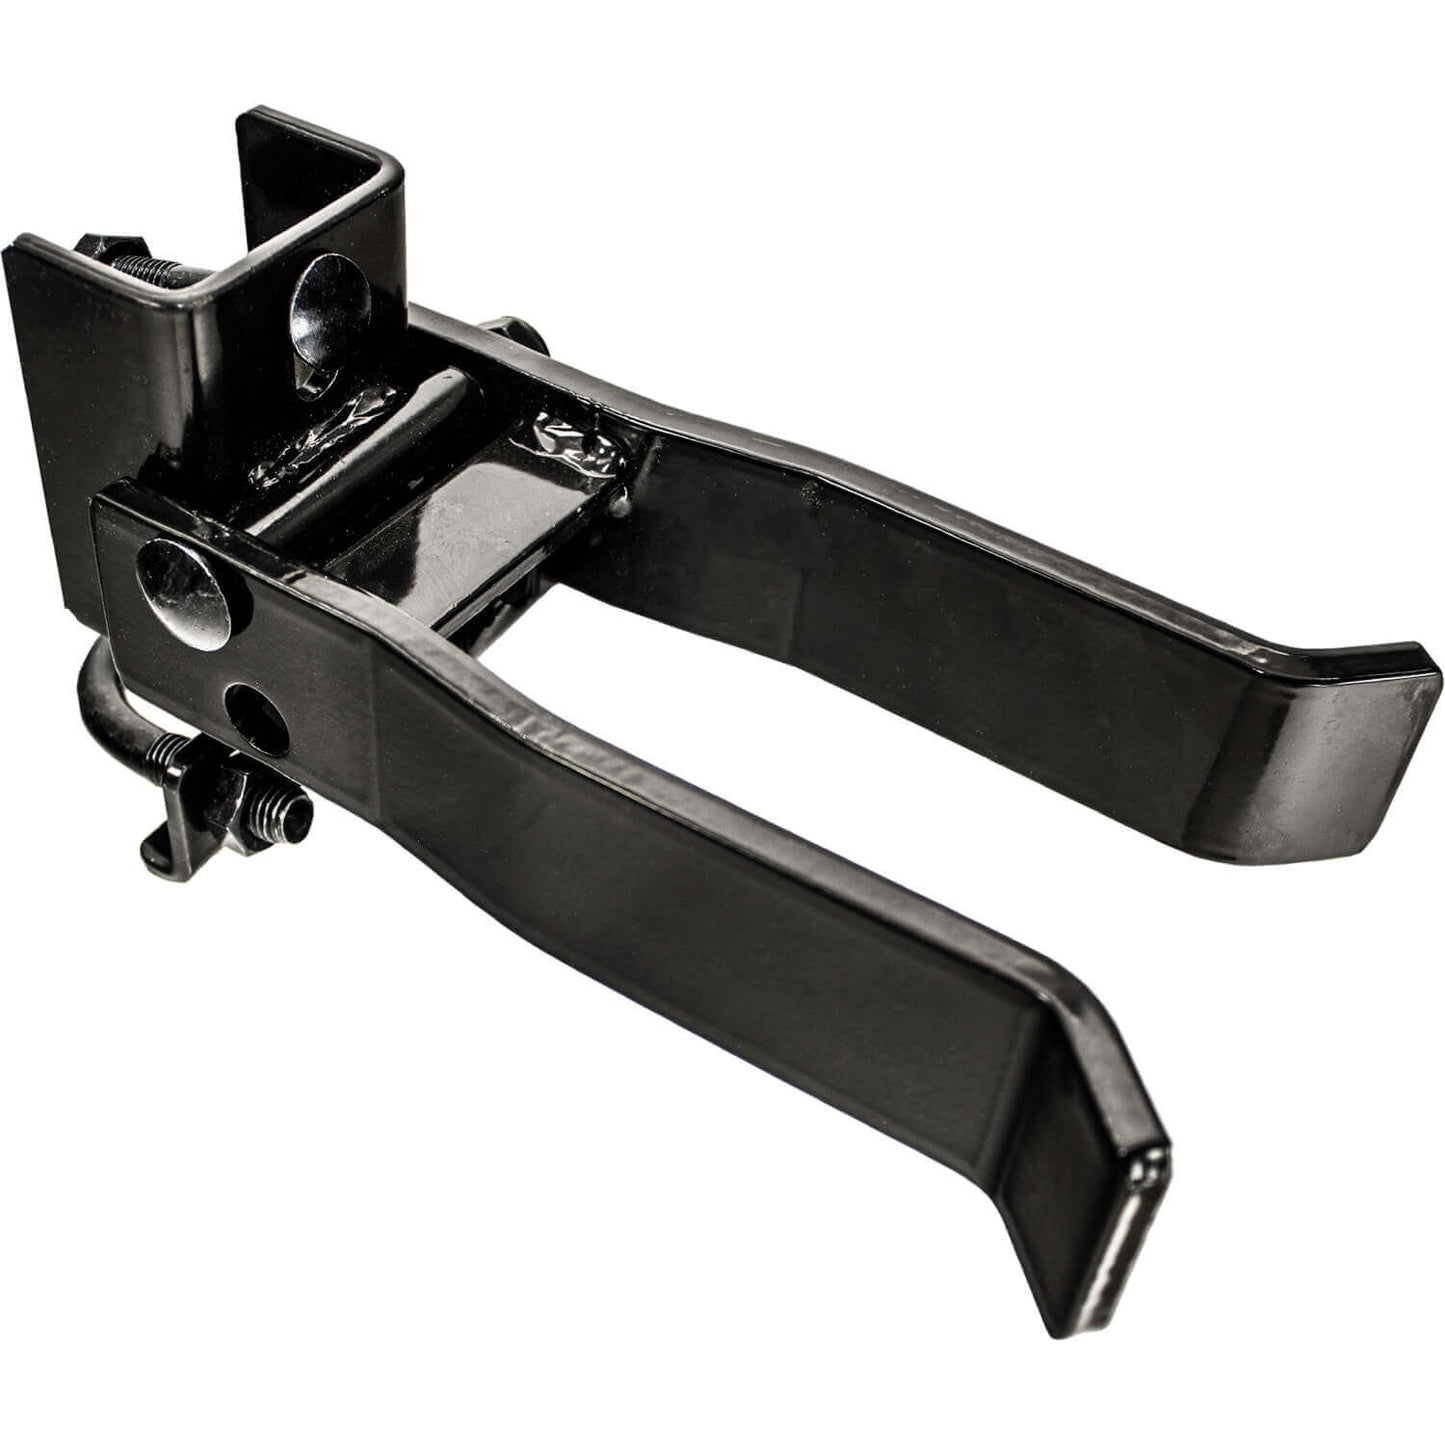 Strong Arm Single Gate Latch - Black - For Gate Frames From 1-5/8" to 2" - Fence Posts 2-3/8", 2-7/8" and 4"